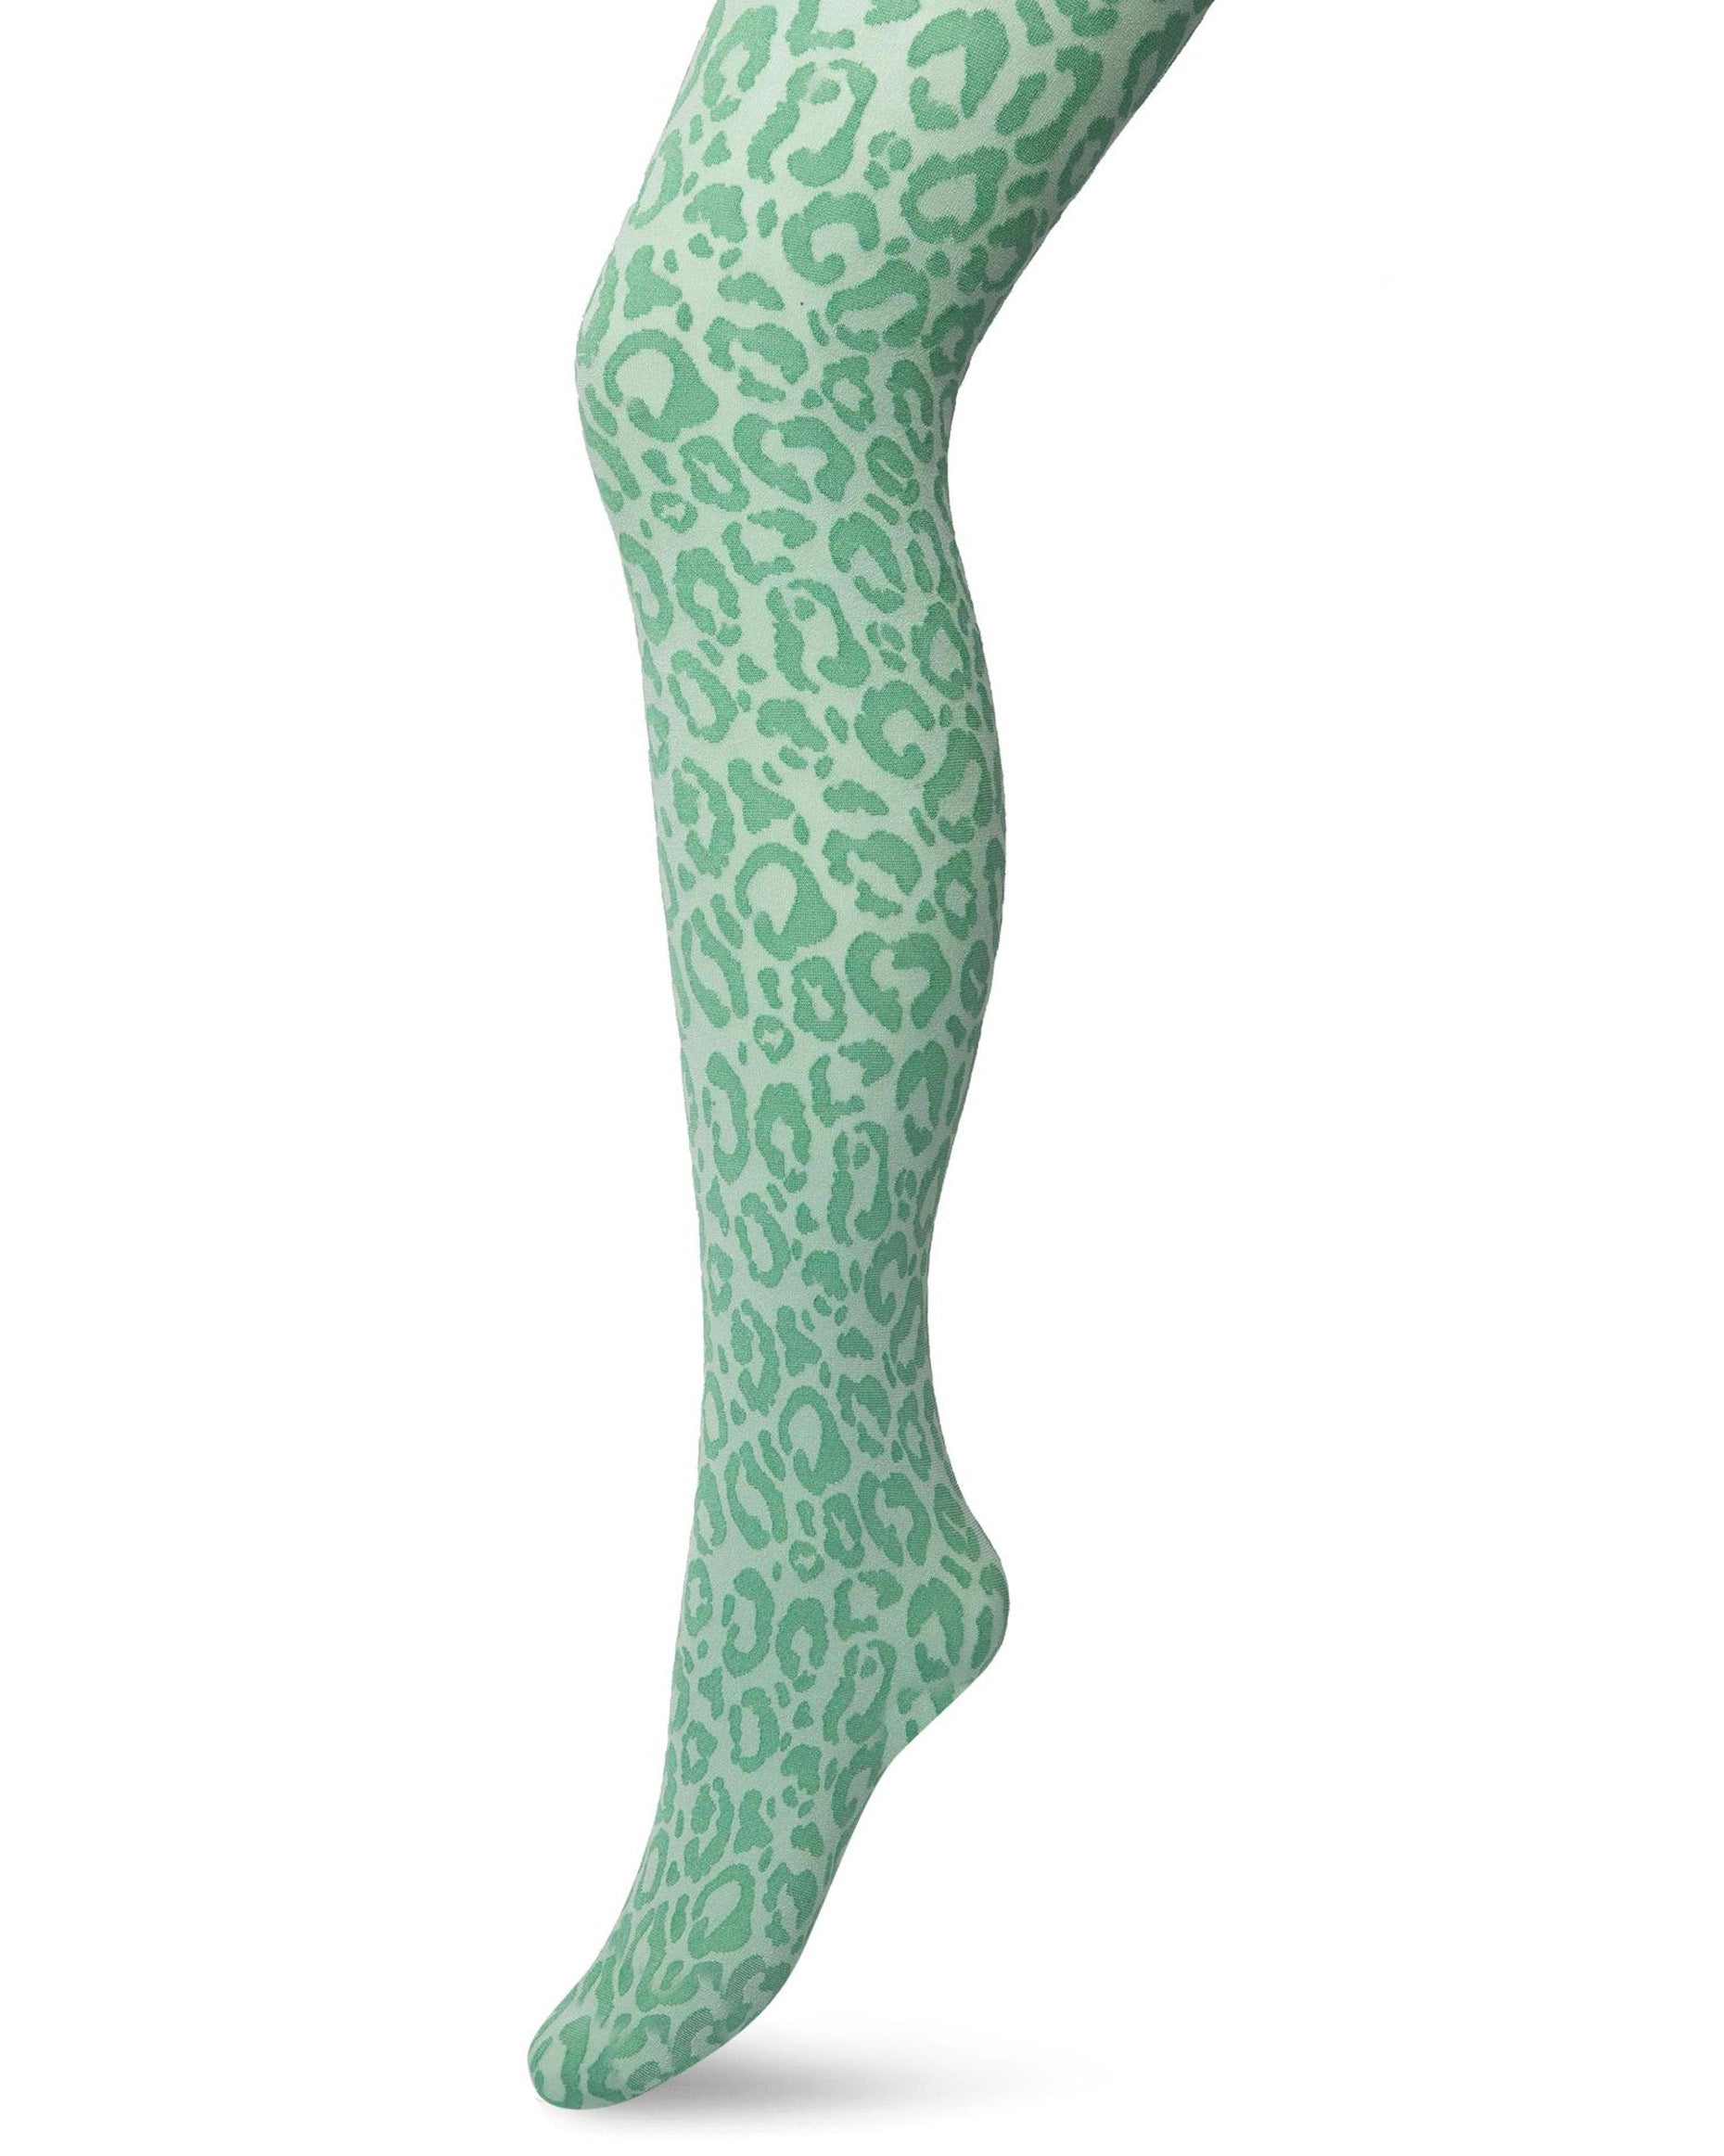 Bonnie Doon - Opaque Panther Tights - Mint green fashion tights with a woven leopard print style pattern in a darker tone, flat seams, gusset and deep comfort waistband.